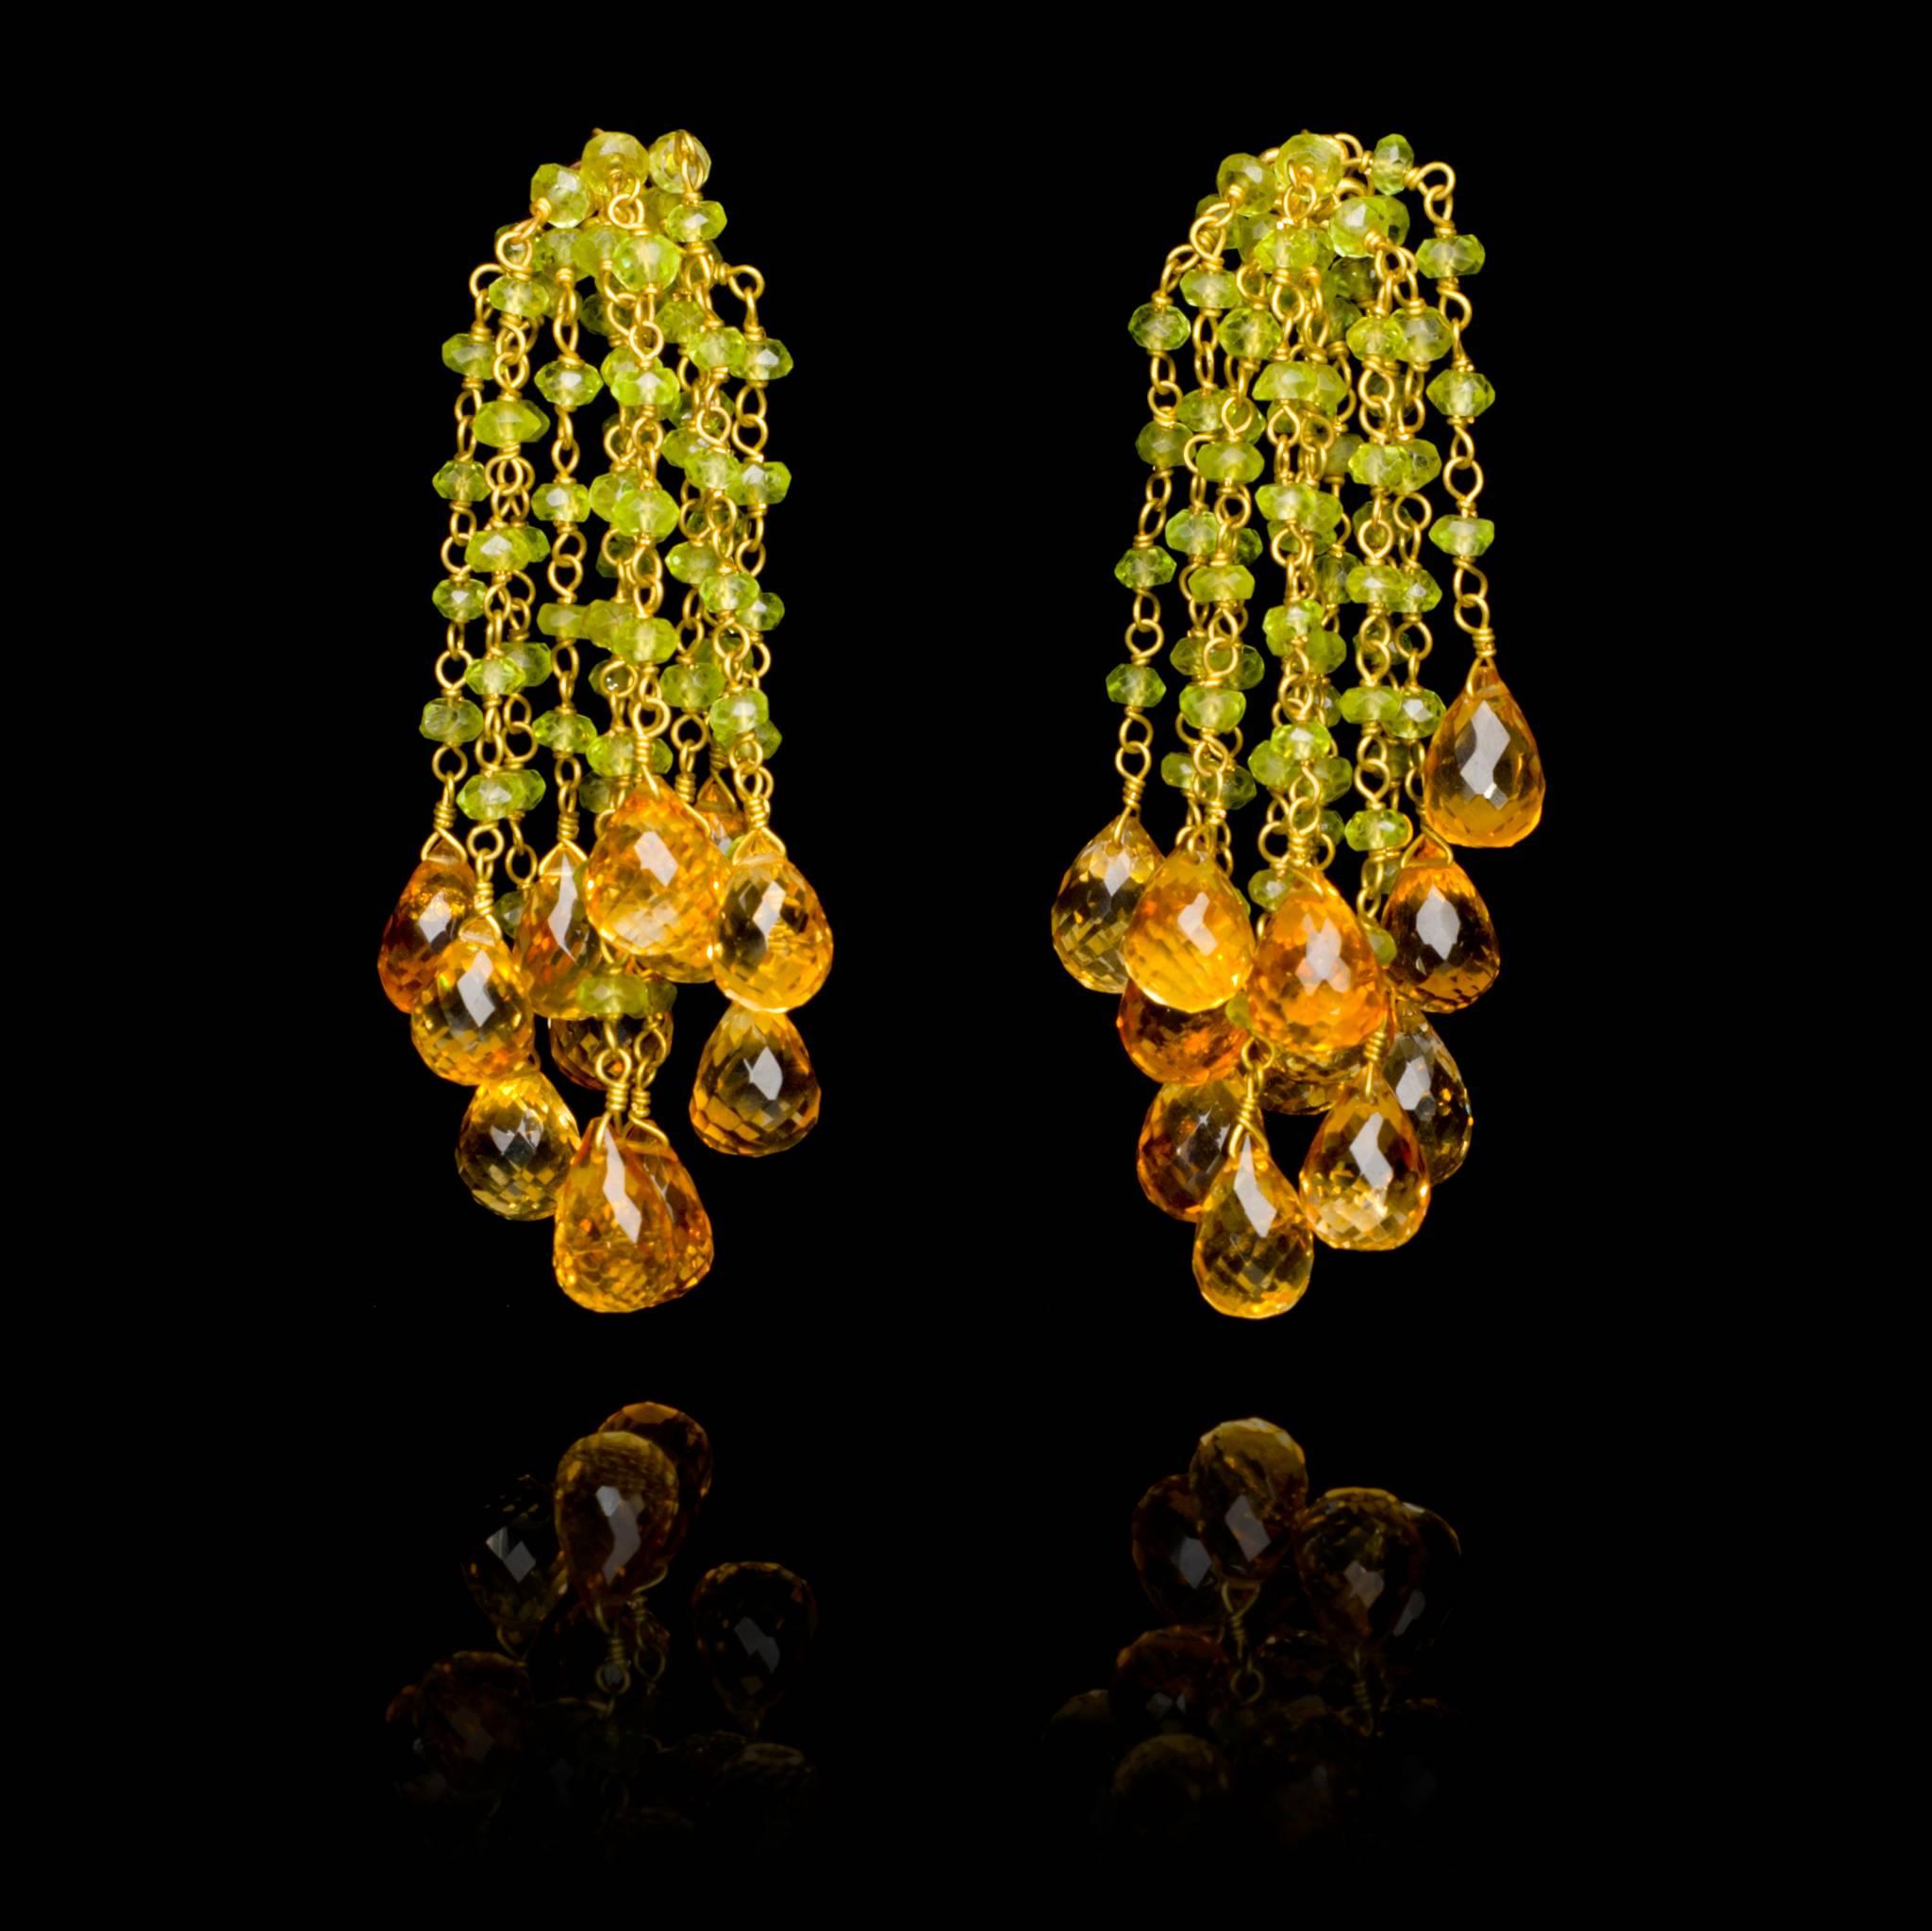 A pair of stylish hand crafted 18 karat gold Waterfall peridot and citrine bead earrings. Wear them on their own or with our matching gold and peridot bead cuff. Earring length is 6cm, 2.36in. 

The same design is available with red spinel beads and